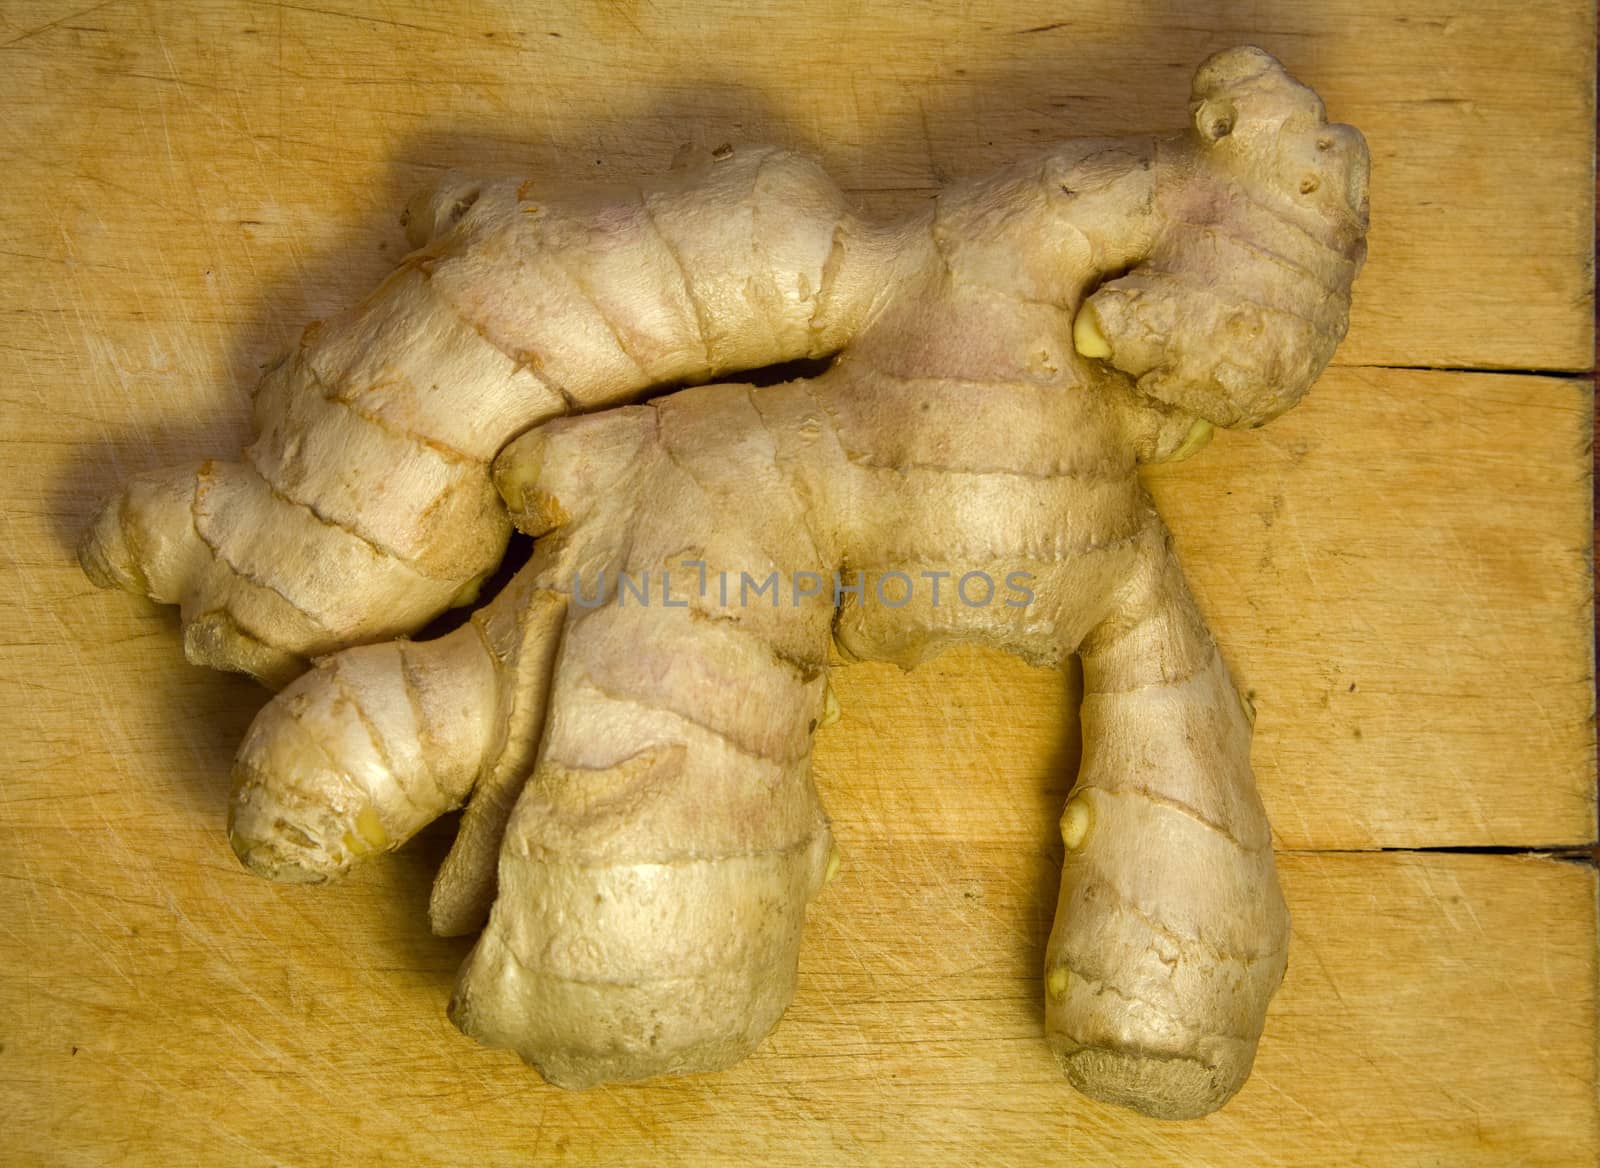  raw ginger root on wooden background